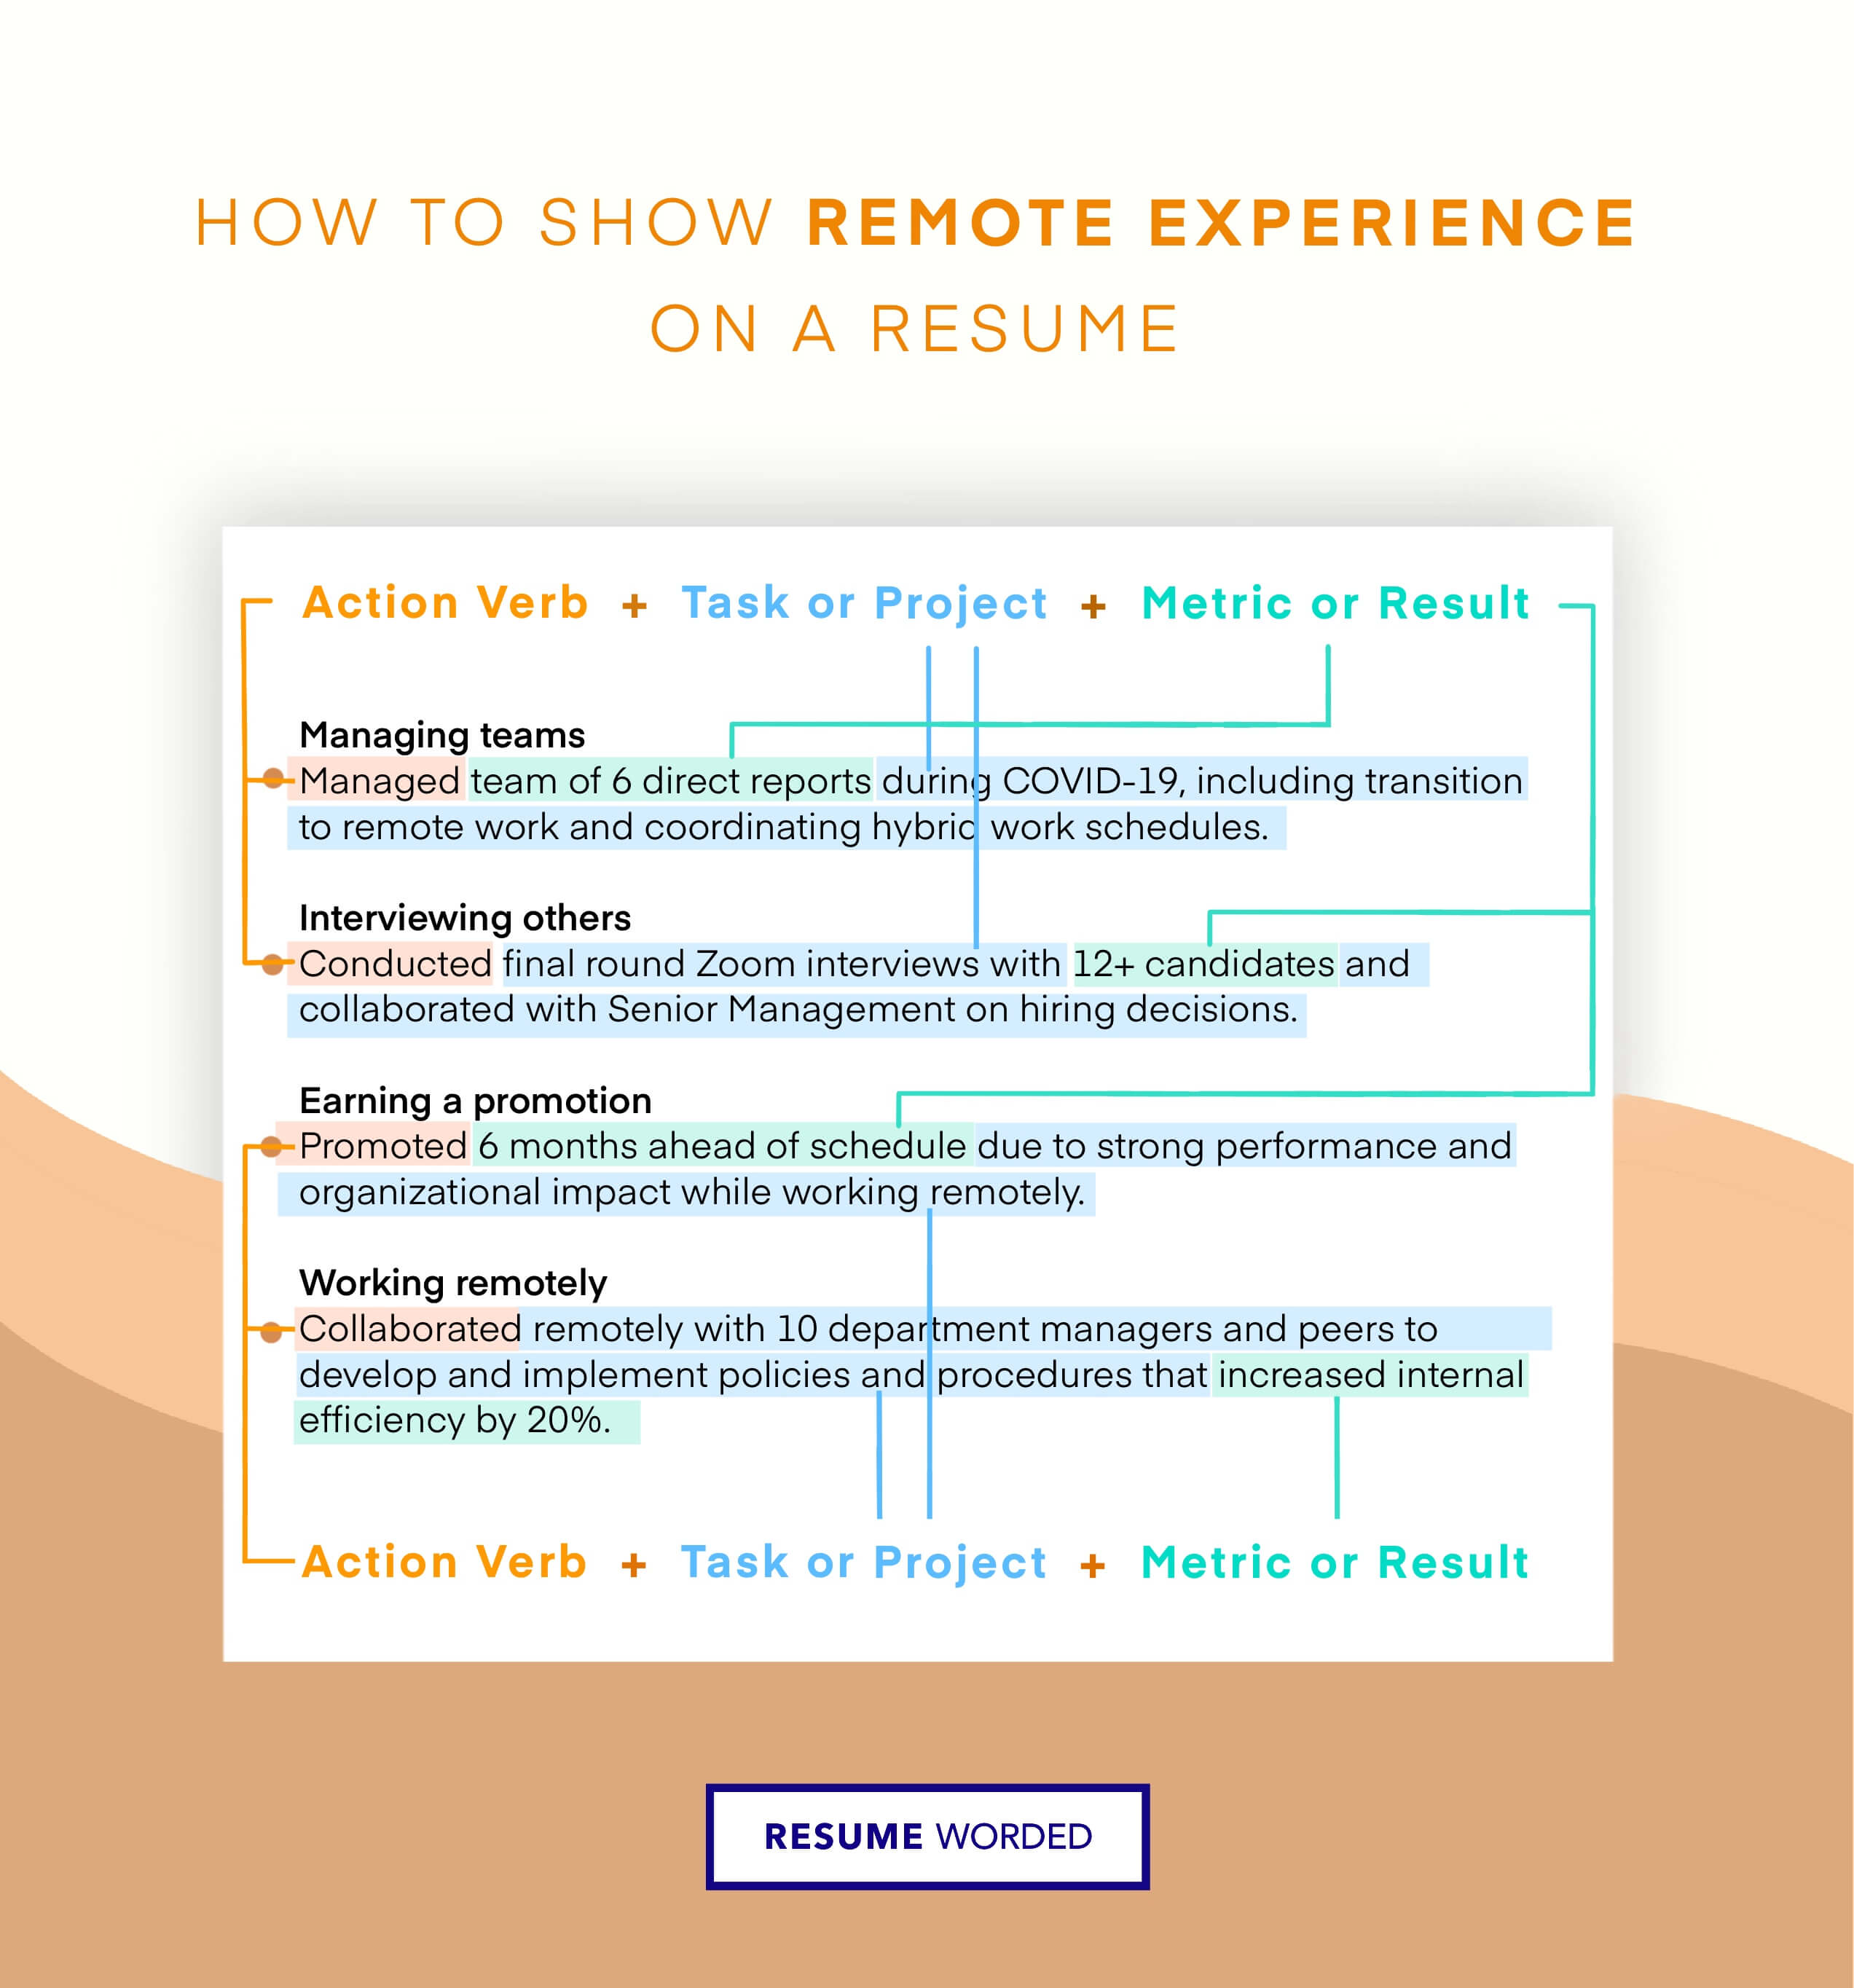 Demonstrate your expertise with remote support tools - Technical Support Specialist Resume